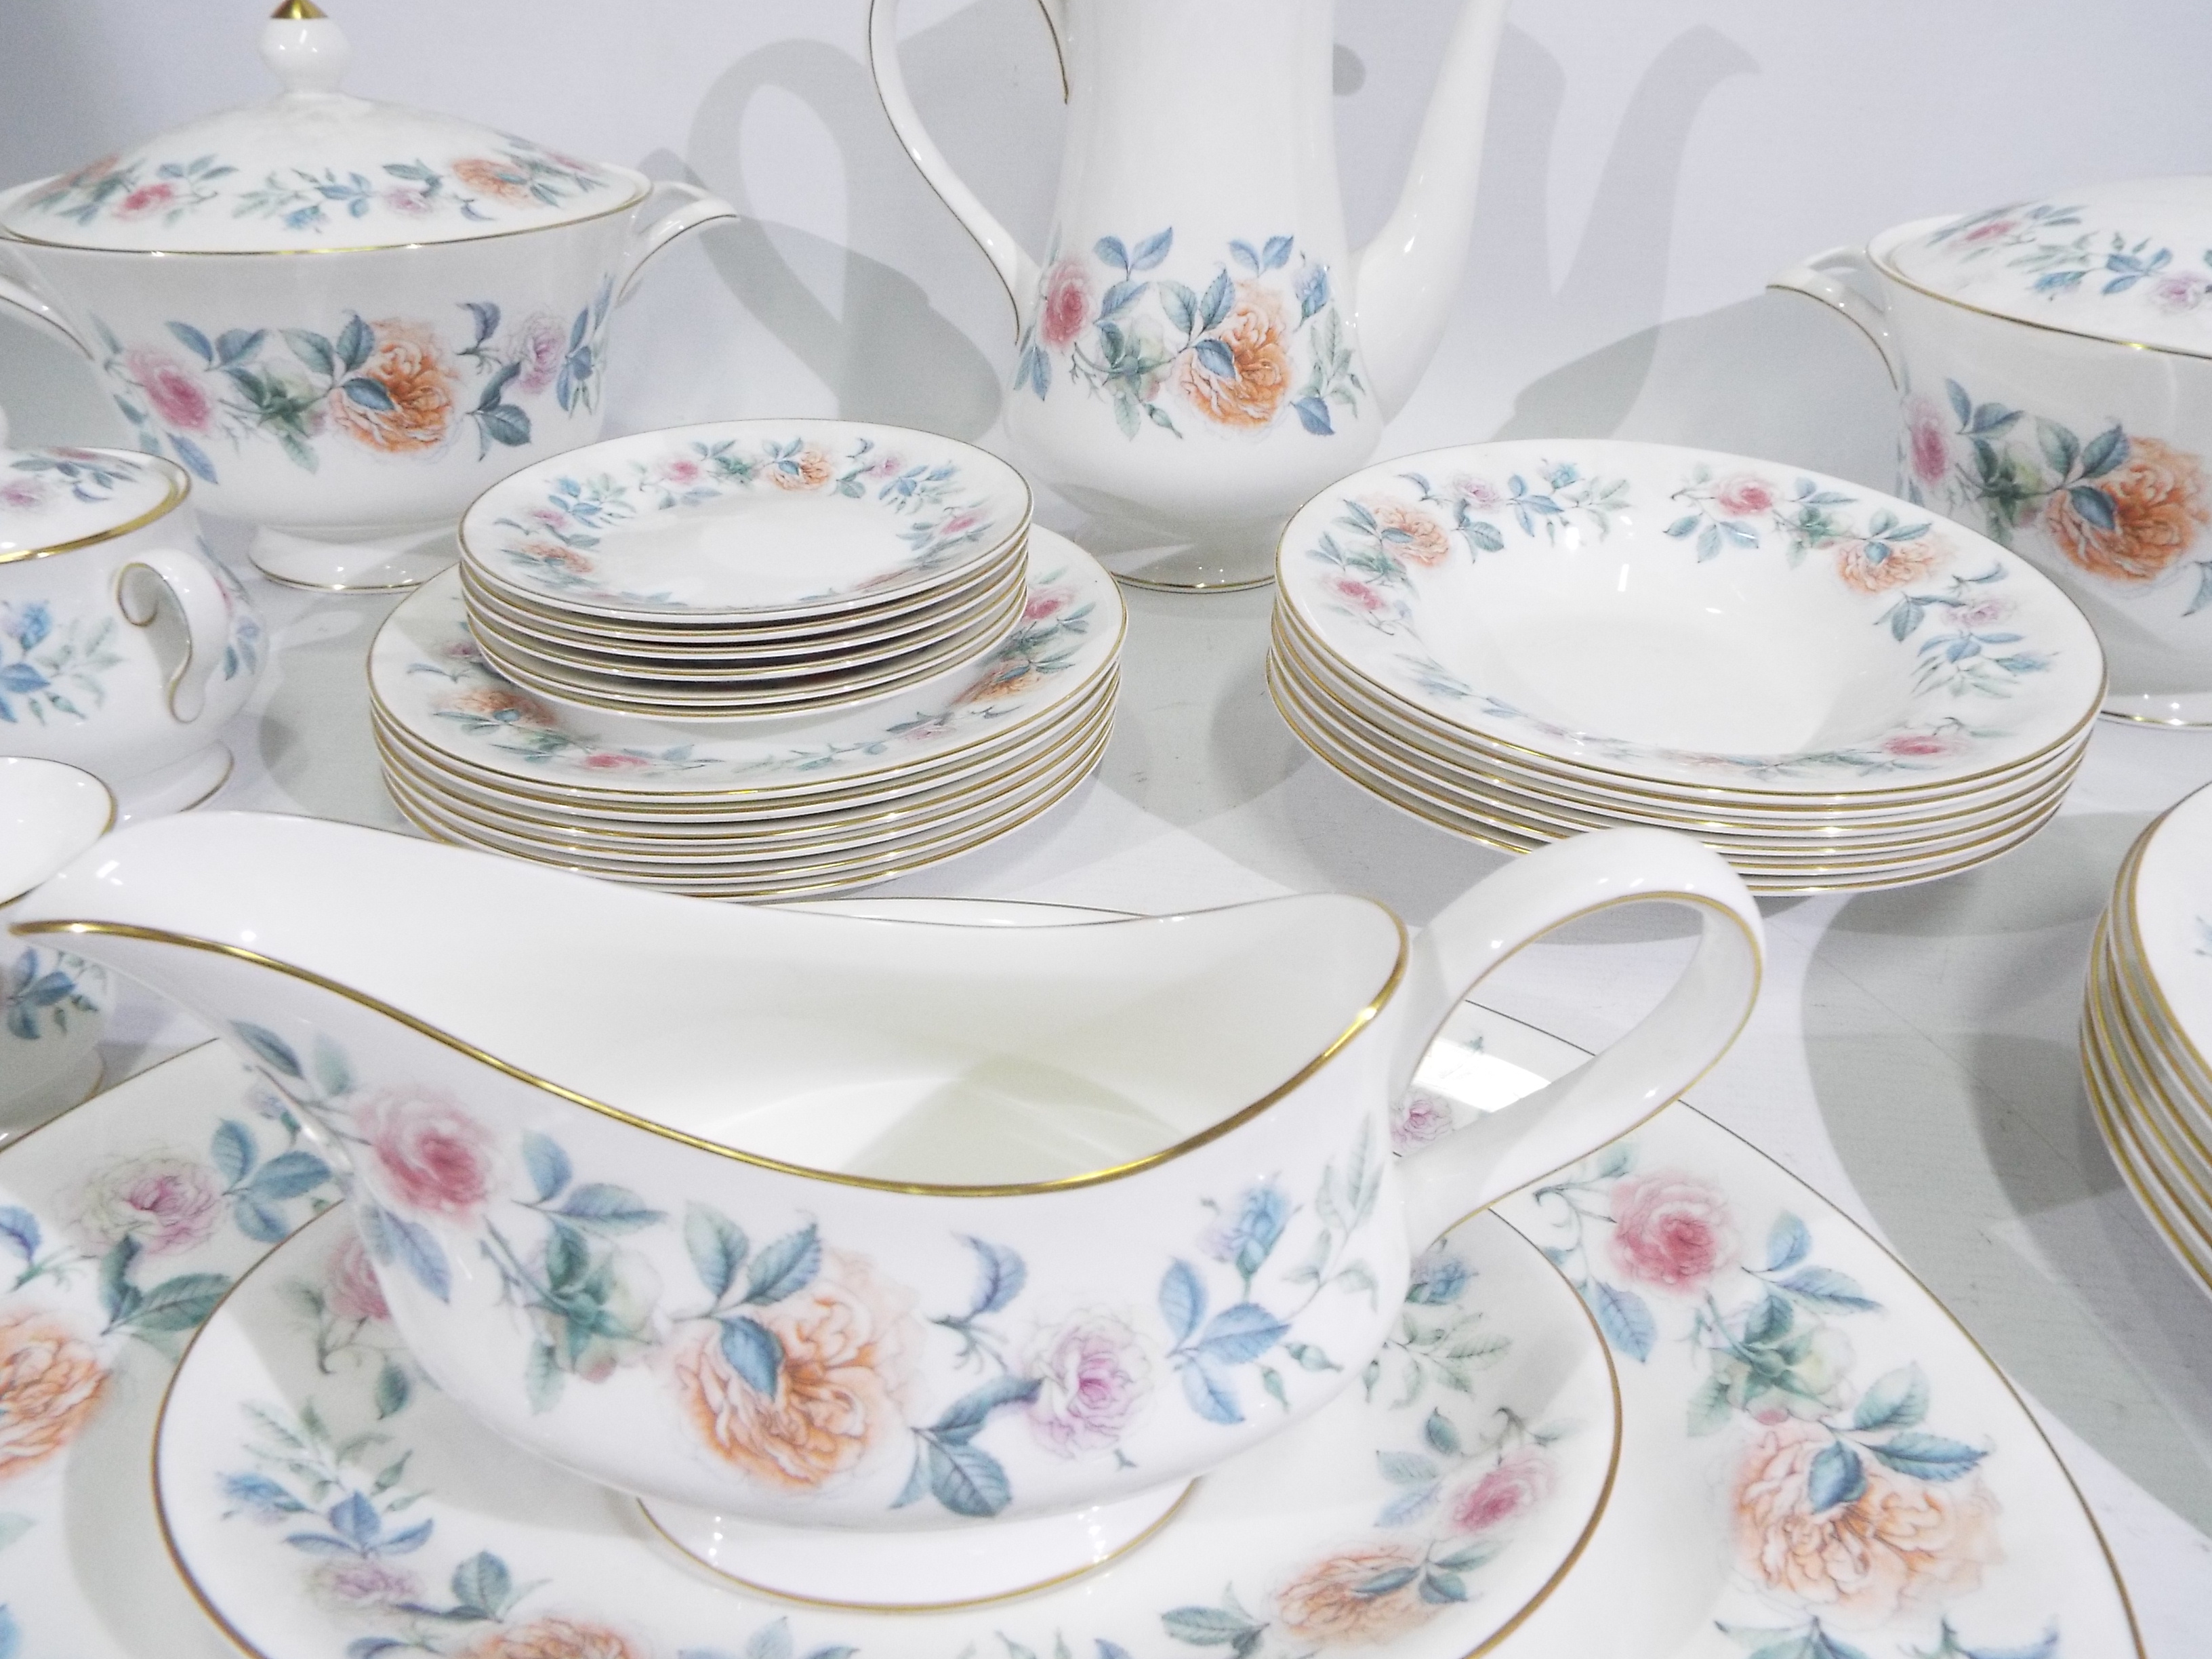 Wedgwood - A collection of dinner and tea wares in the Mist Rose pattern comprising dinner plates, - Image 3 of 5